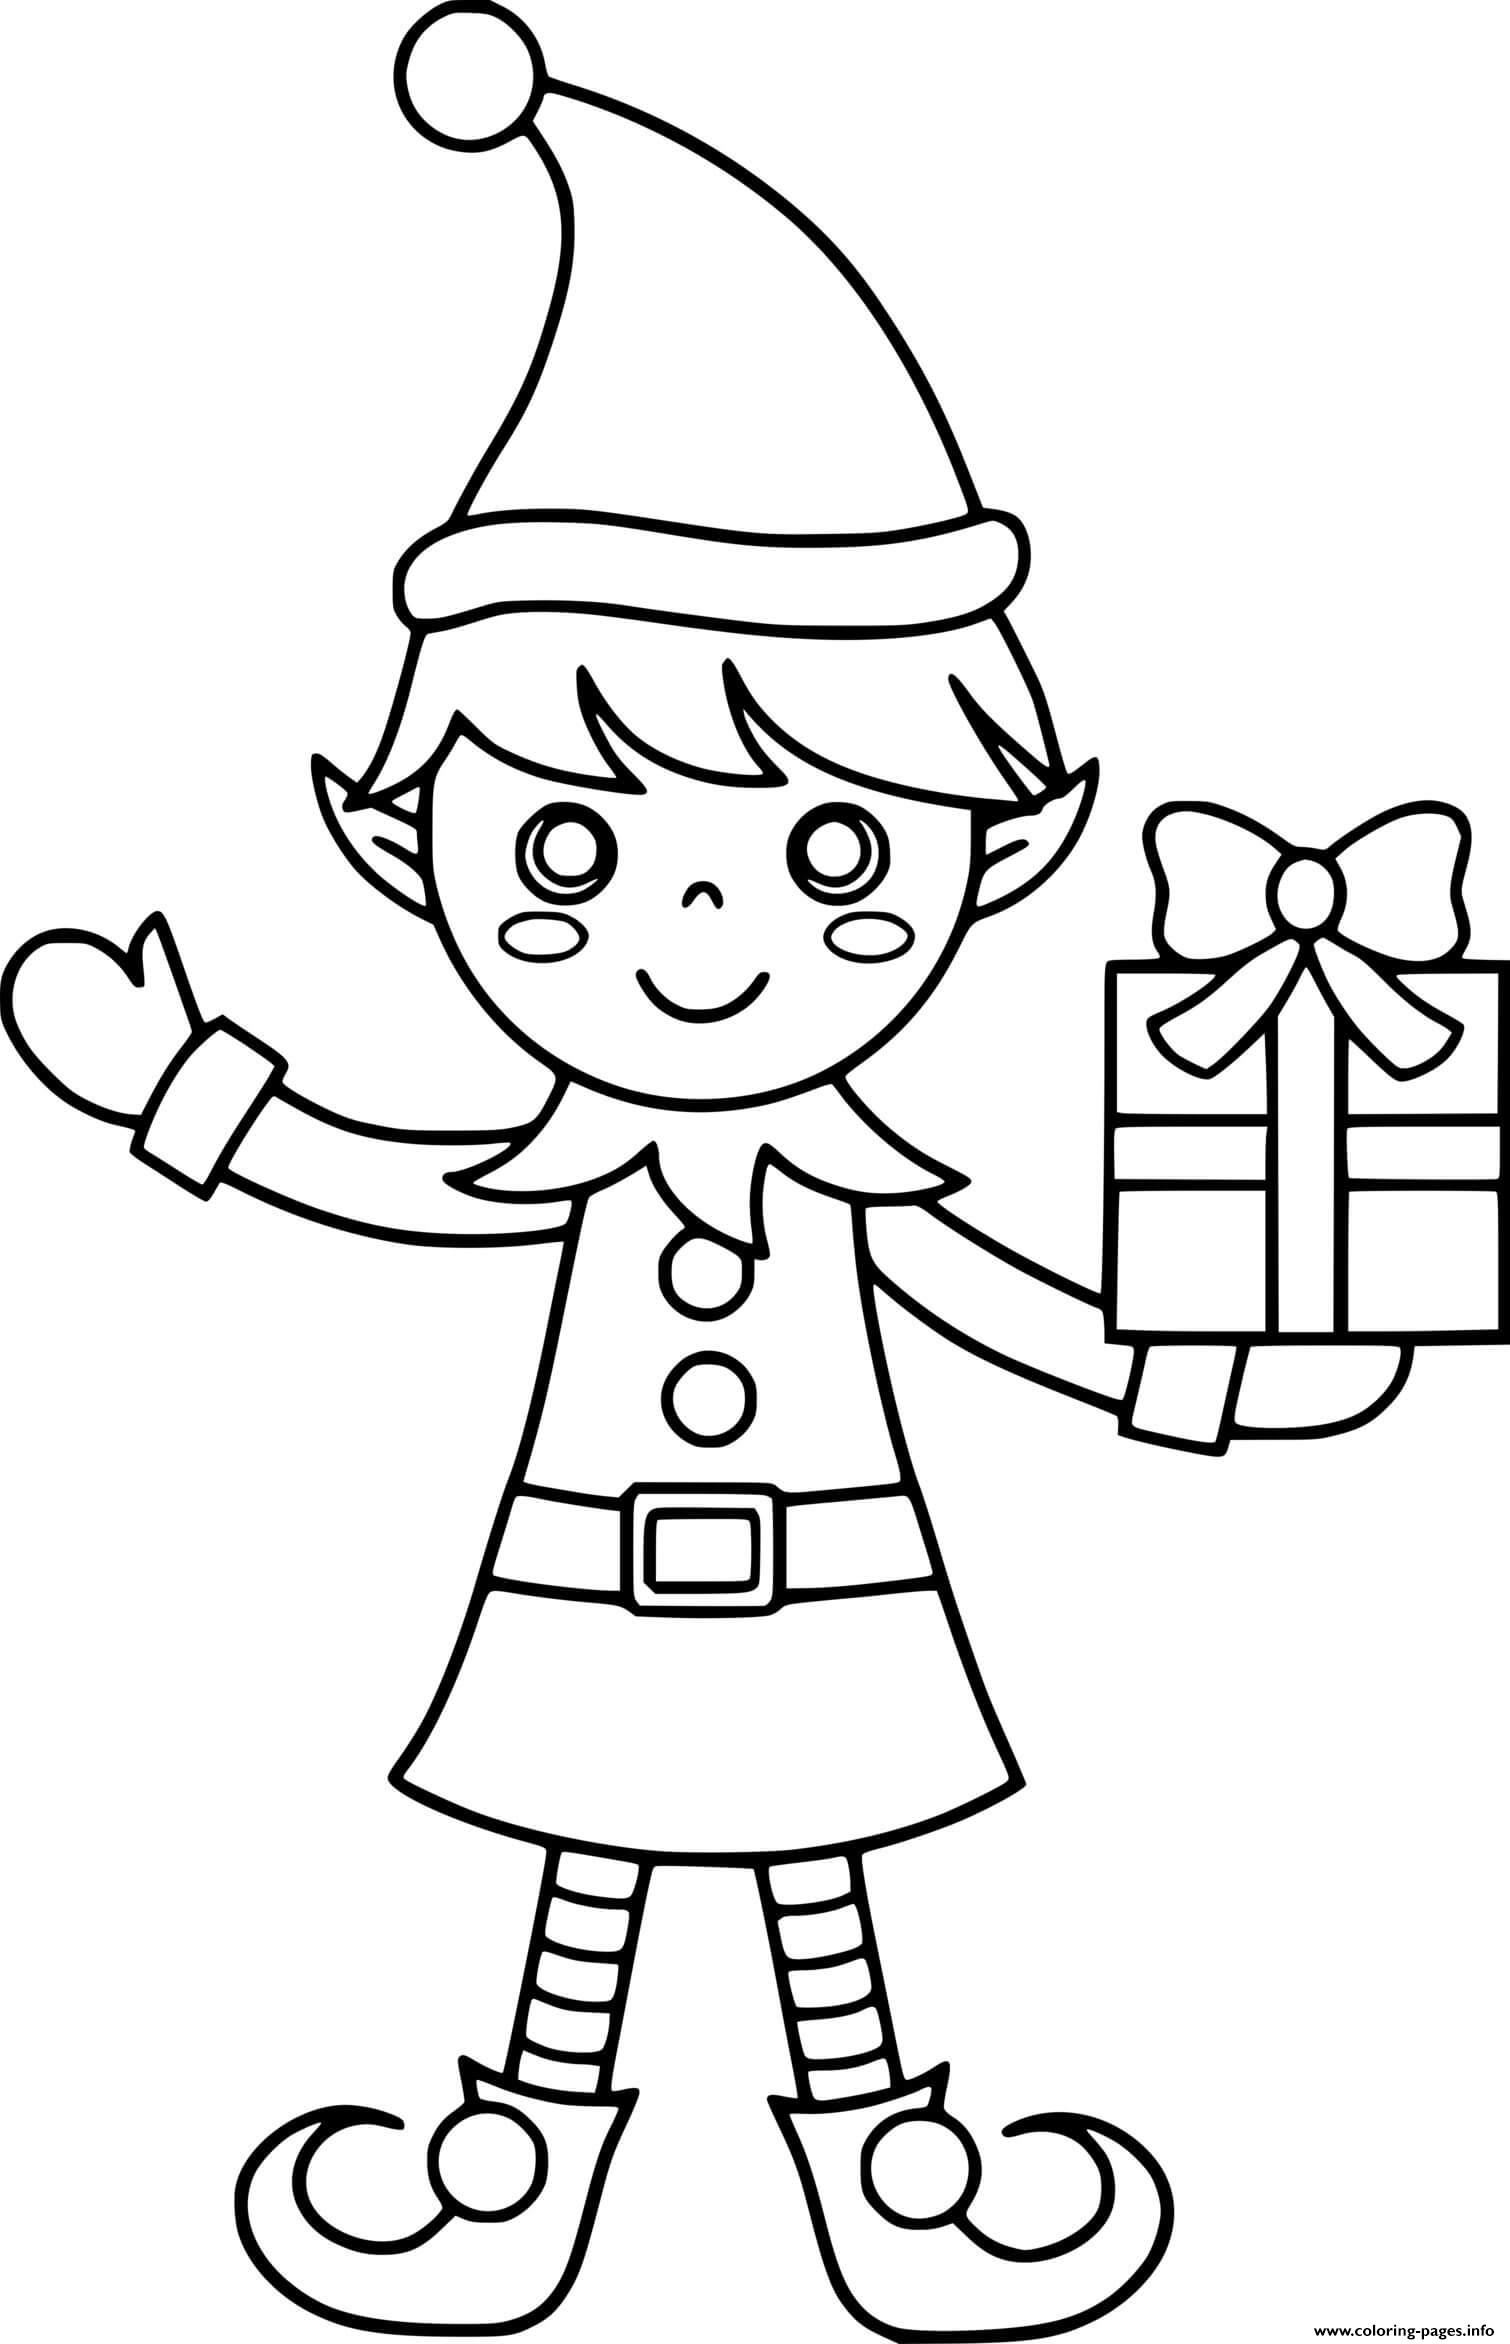 little-elf-bring-a-gift-coloring-page-printable